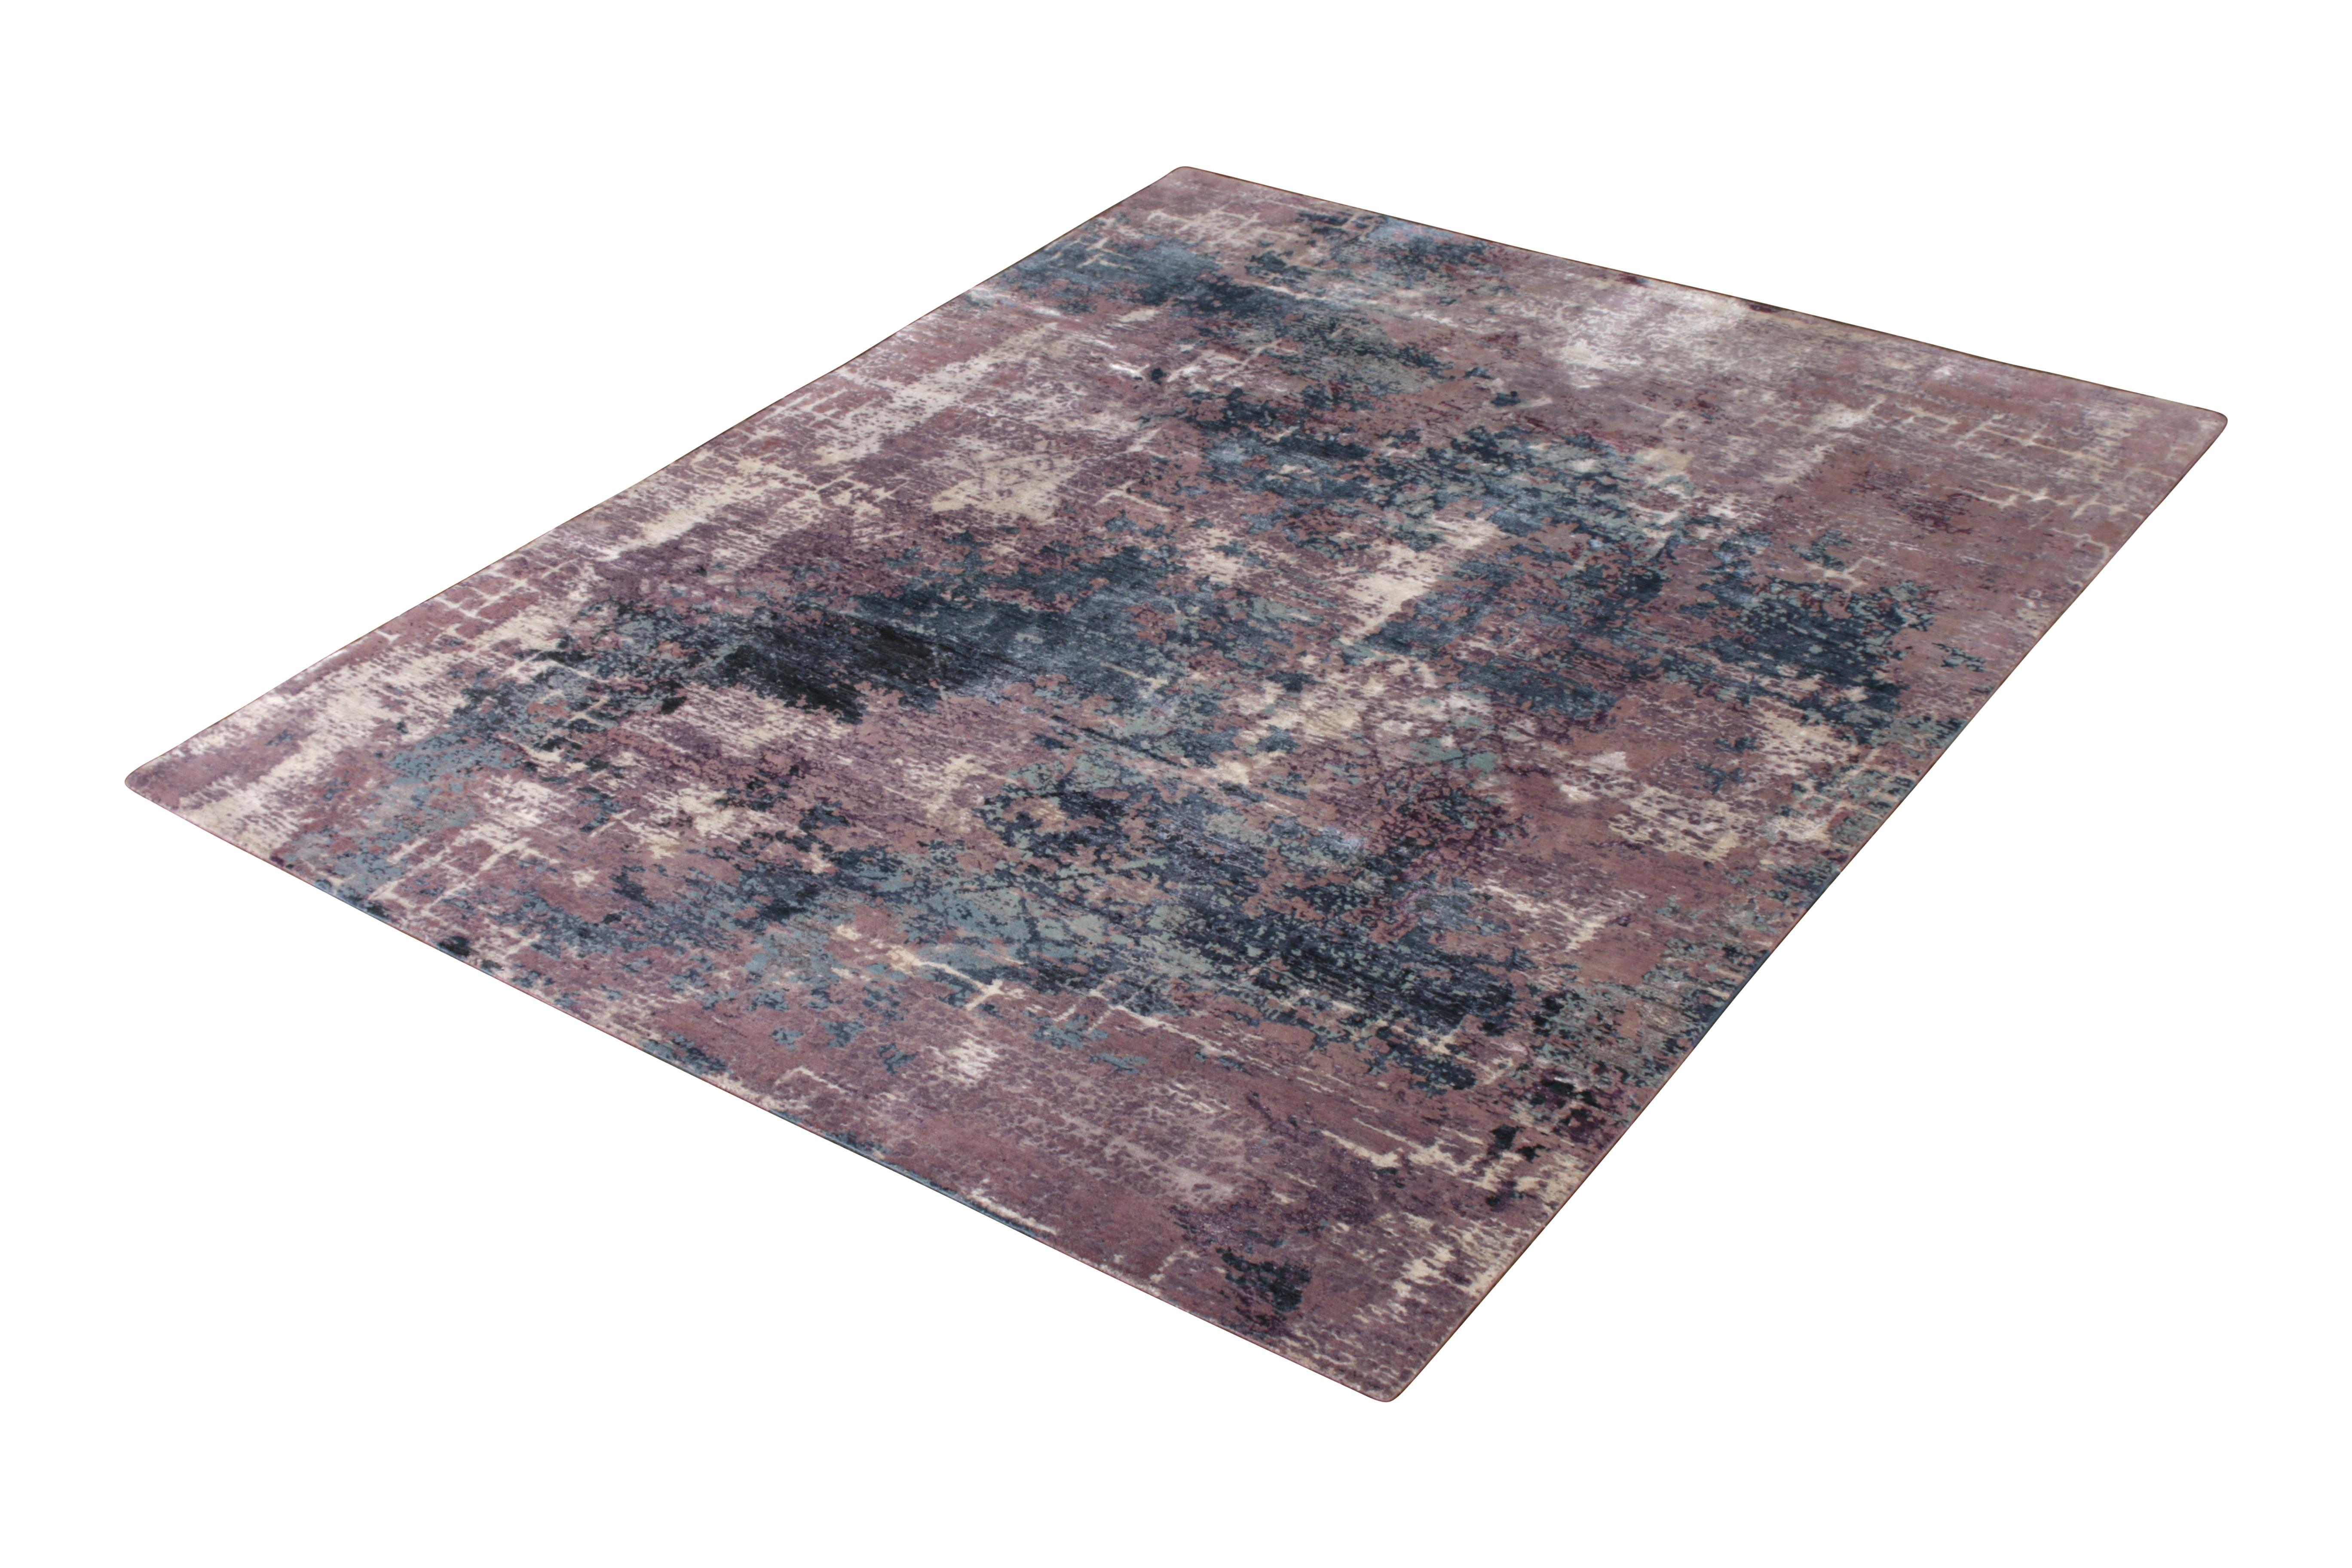 A 9 x 12 abstract rug in painterly blue and purple hues, from Rug & Kilim’s New & Modern rug collection. Hand knotted in wool, a bold rug with an artisan attitude and movement through the smart accenting hues. Approachable and ideal for gallery